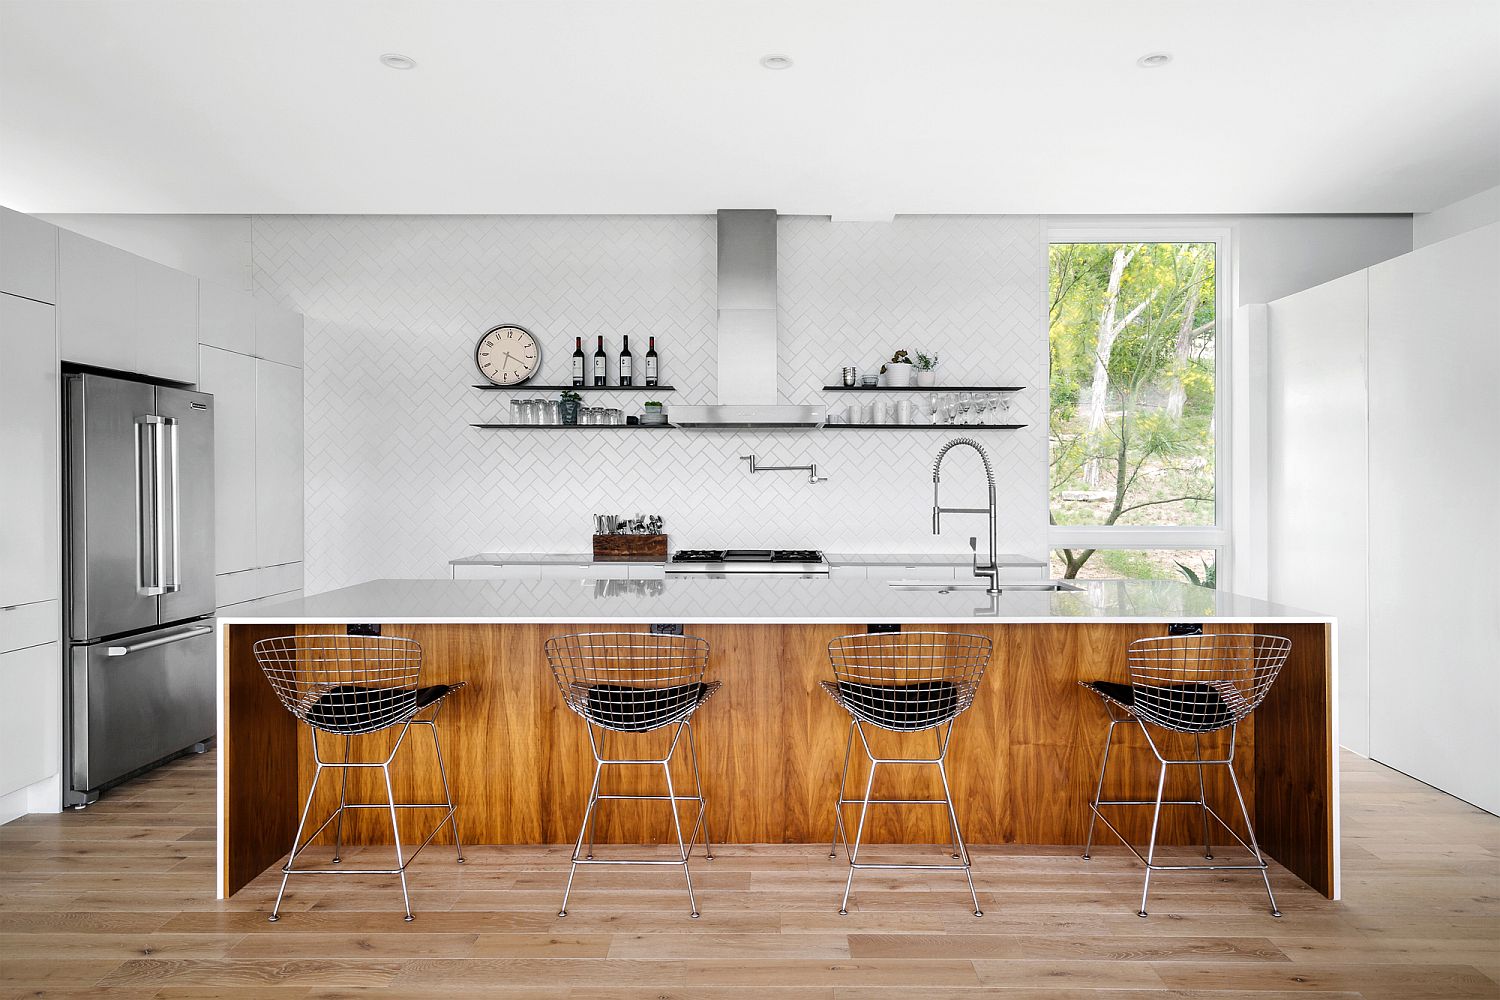 Herringbone-pattern-tiles-create-a-beautiful-backdrop-in-the-kitchen-with-wooden-island